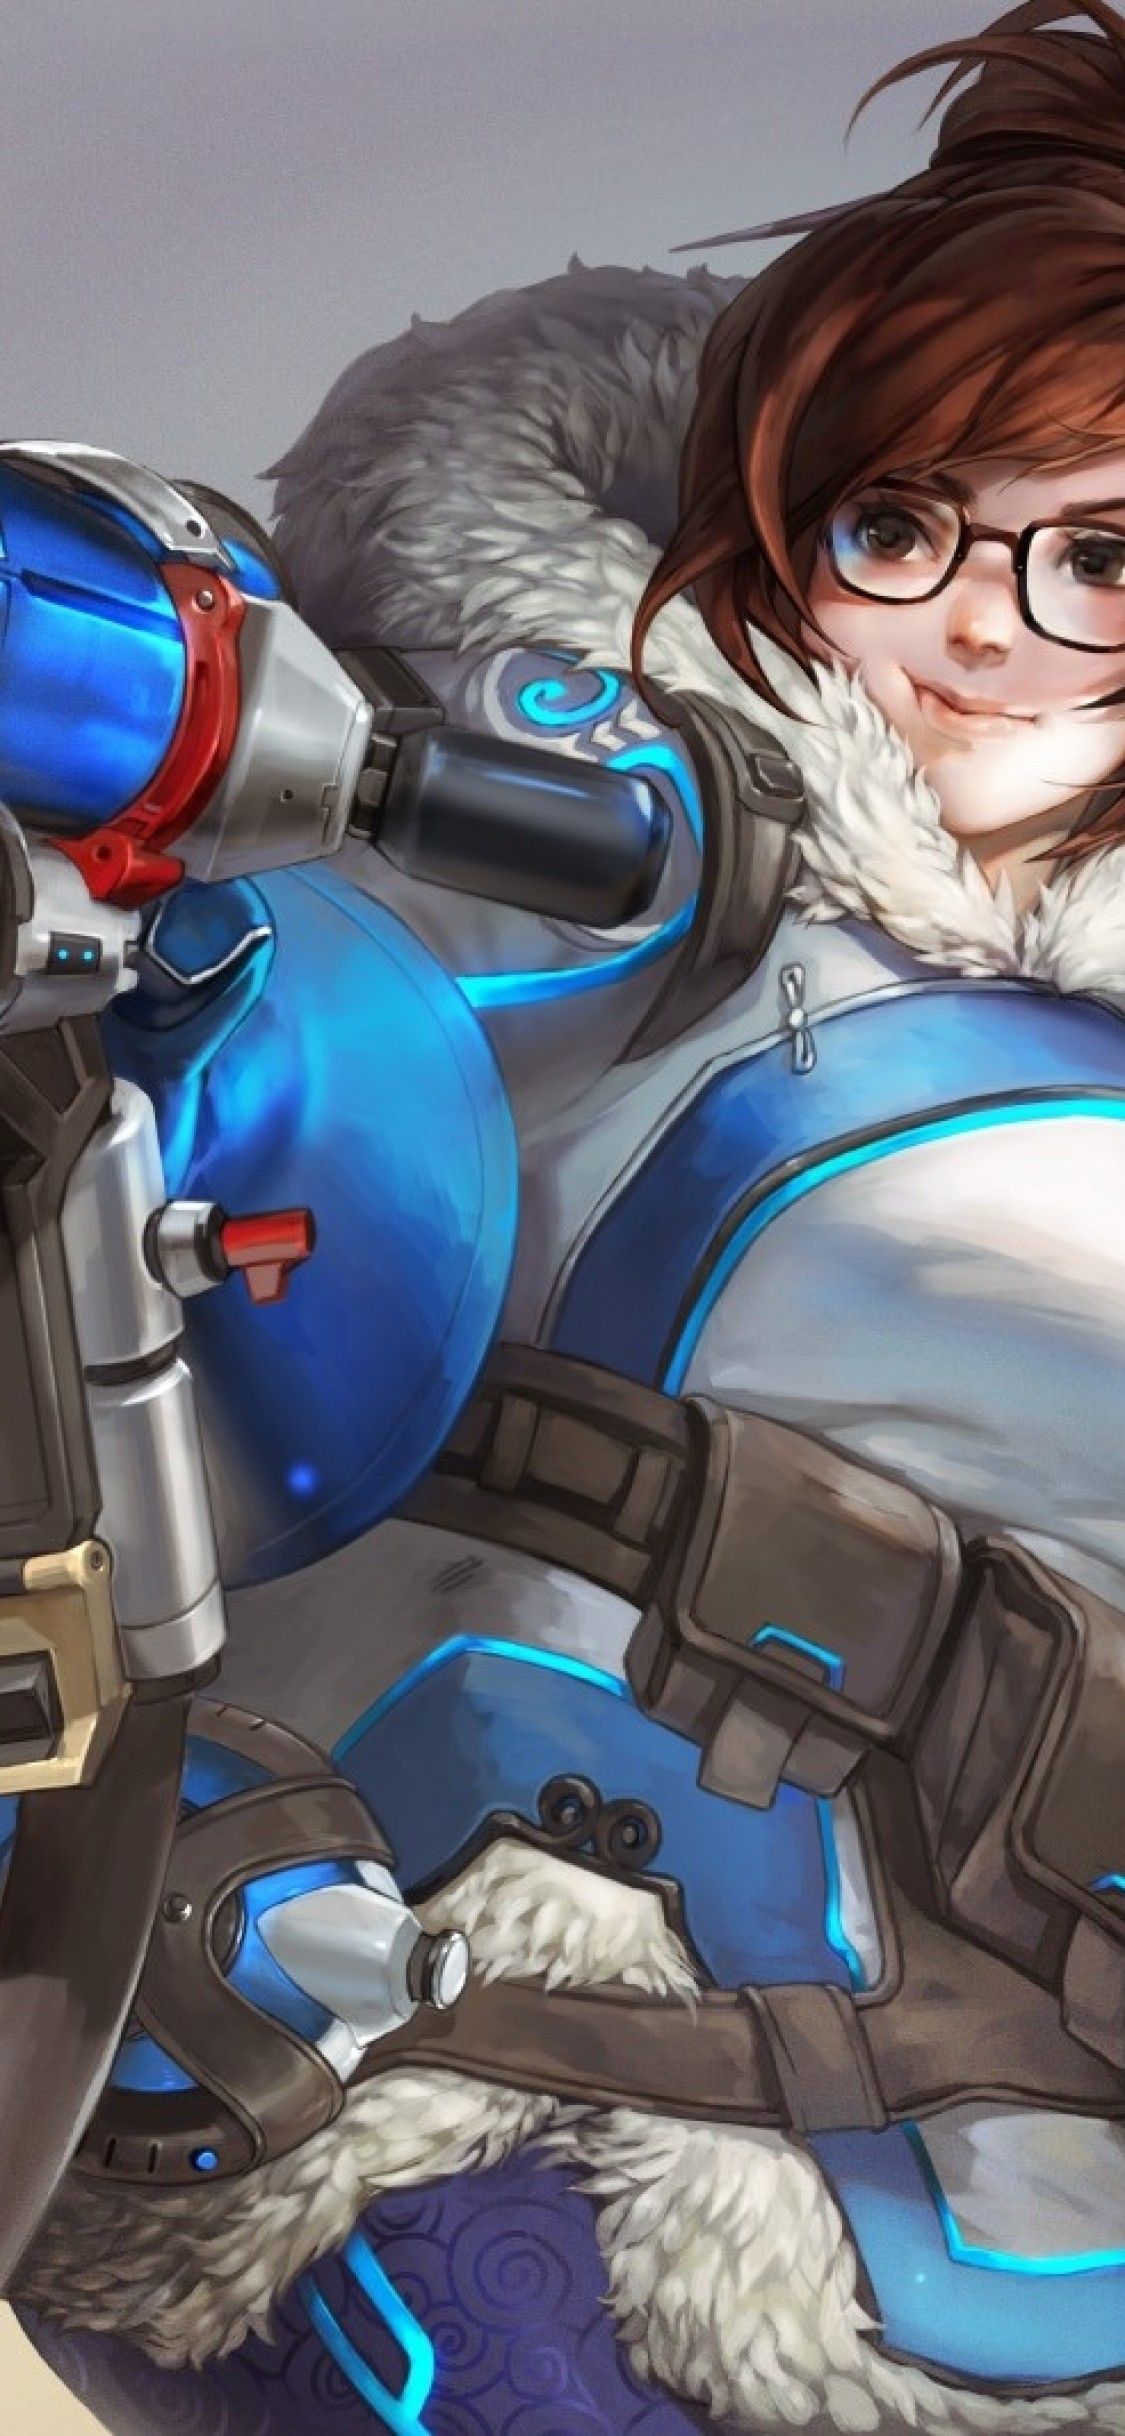 Download 1125x2436 Overwatch, Mei, Chubby Wallpaper for iPhone X